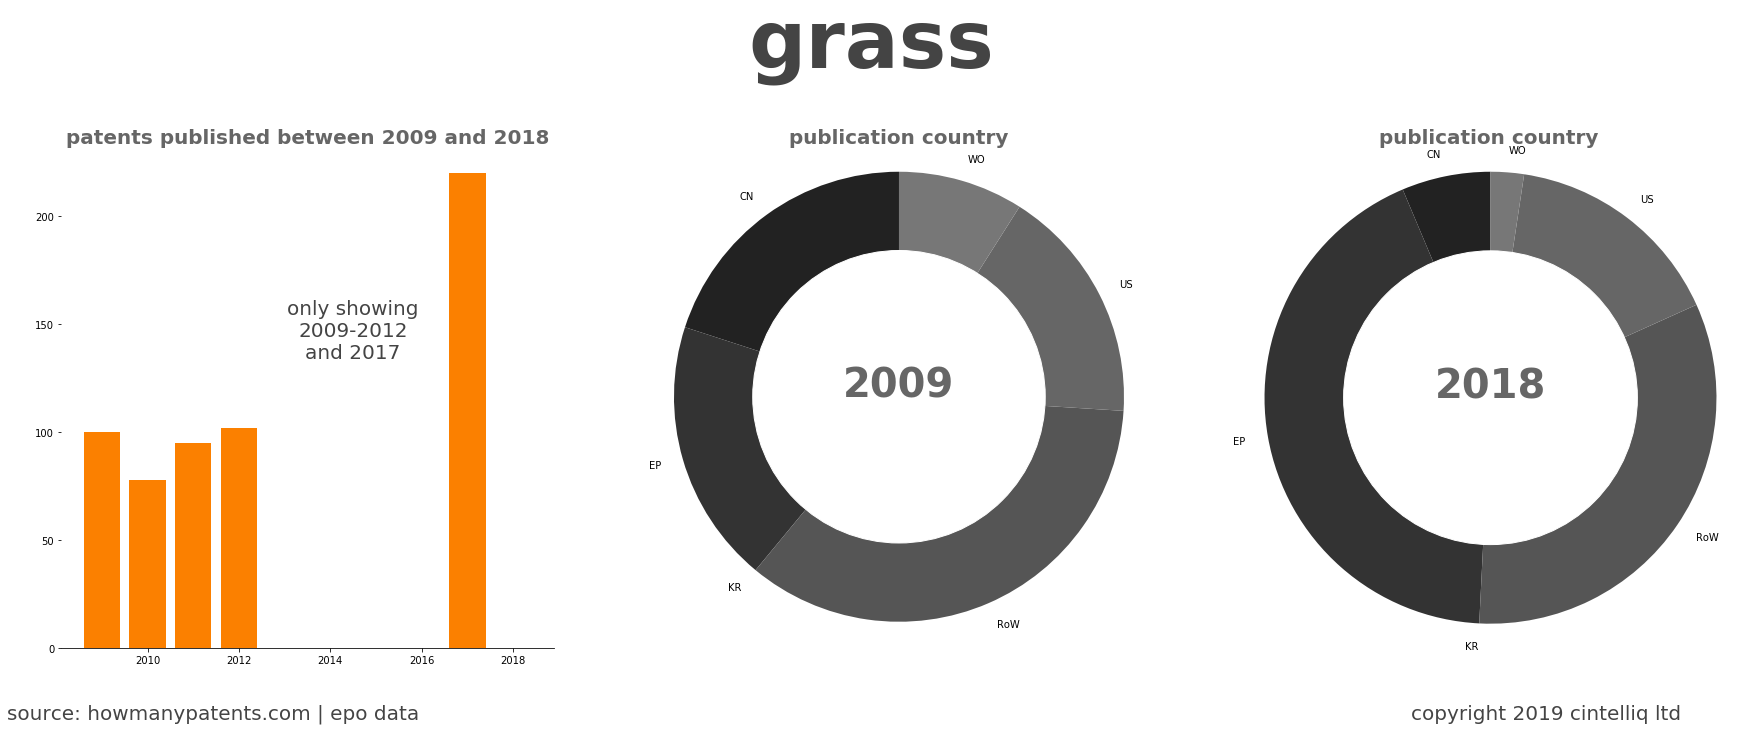 summary of patents for Grass